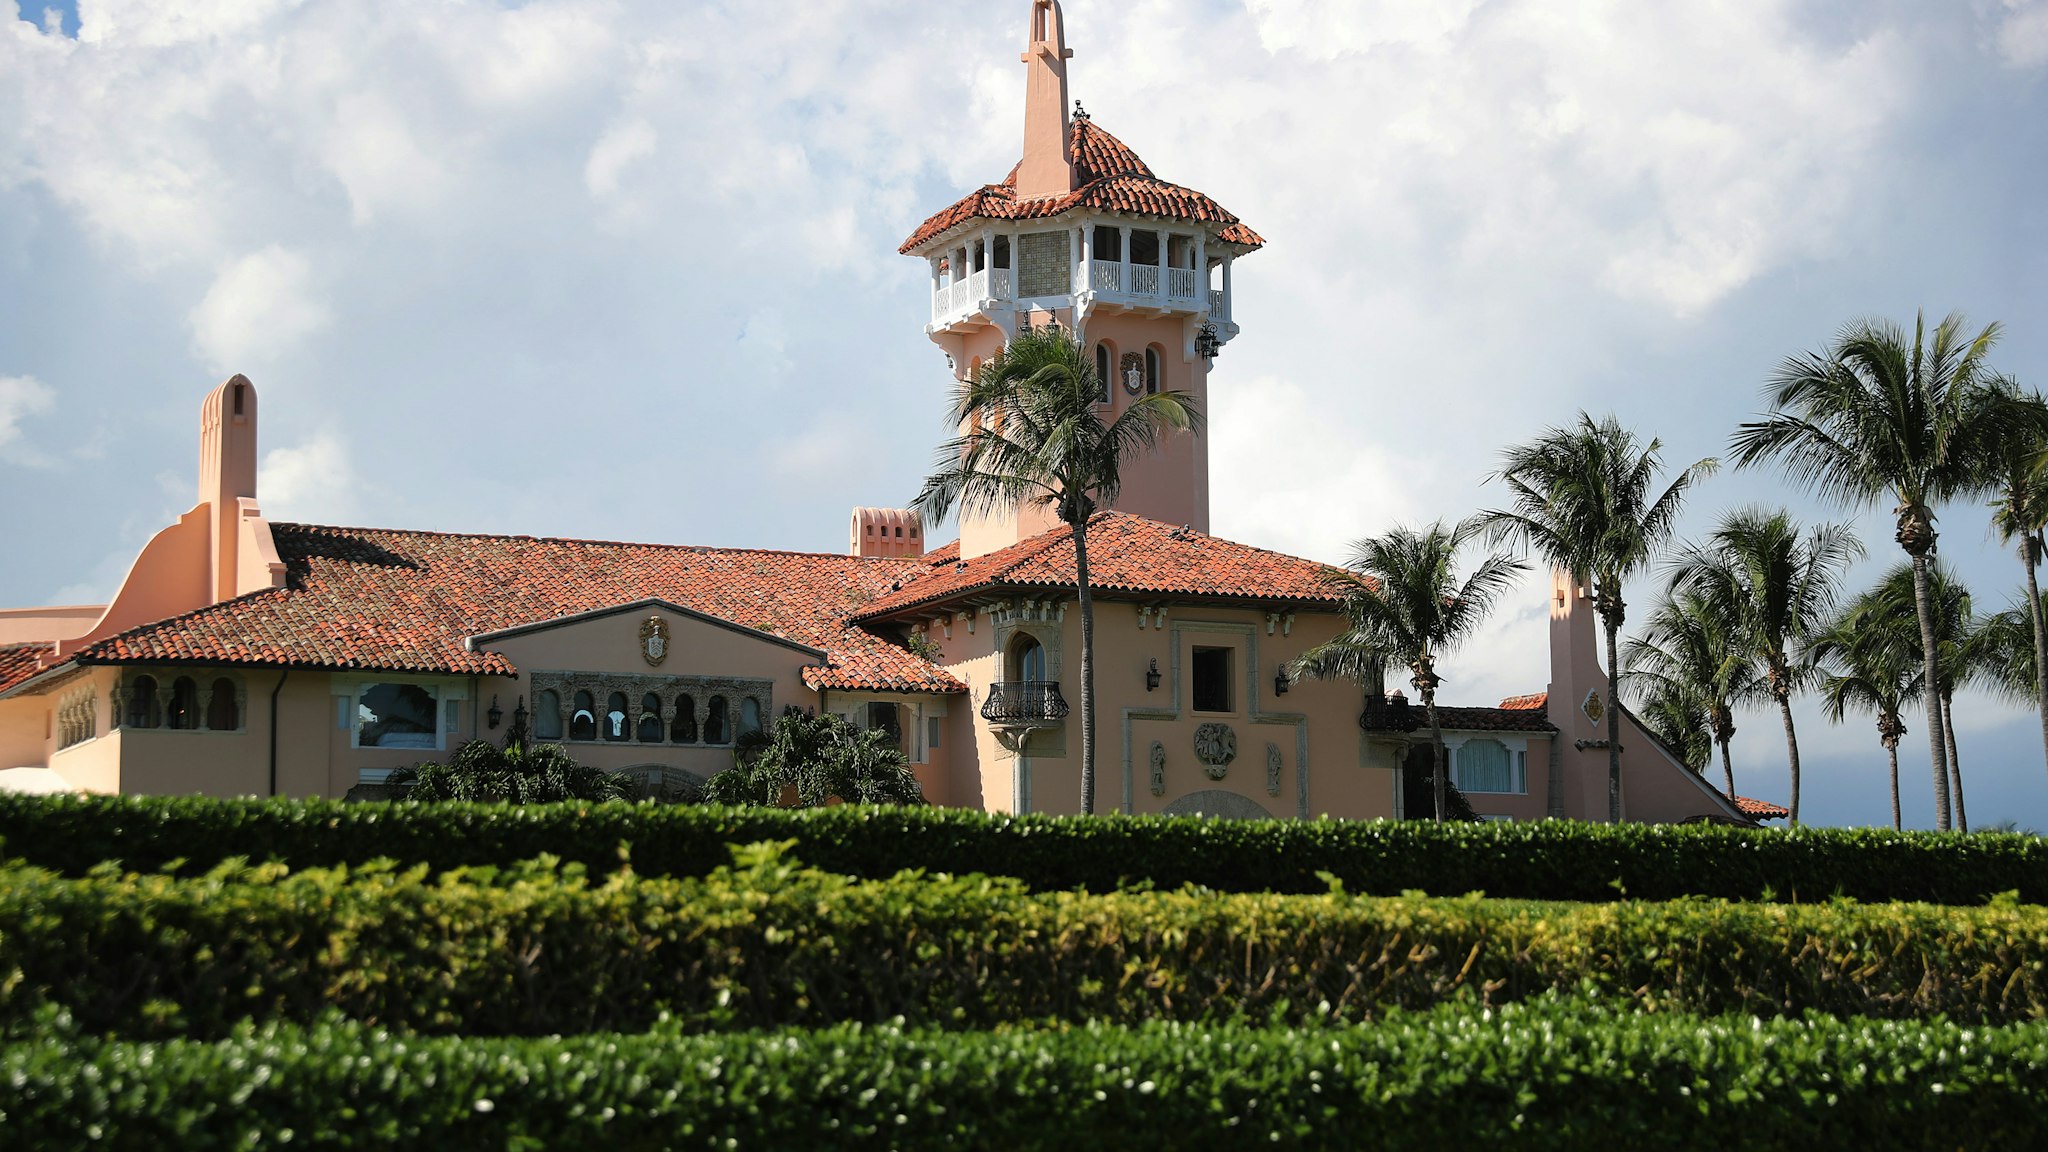 PALM BEACH, FLORIDA - NOVEMBER 01: President Donald Trump's Mar-a-Lago resort is seen on November 1, 2019 in Palm Beach, Florida. President Trump announced that he will be moving from New York and making Palm Beach, Florida his permanent residence. (Photo by Joe Raedle/Getty Images)